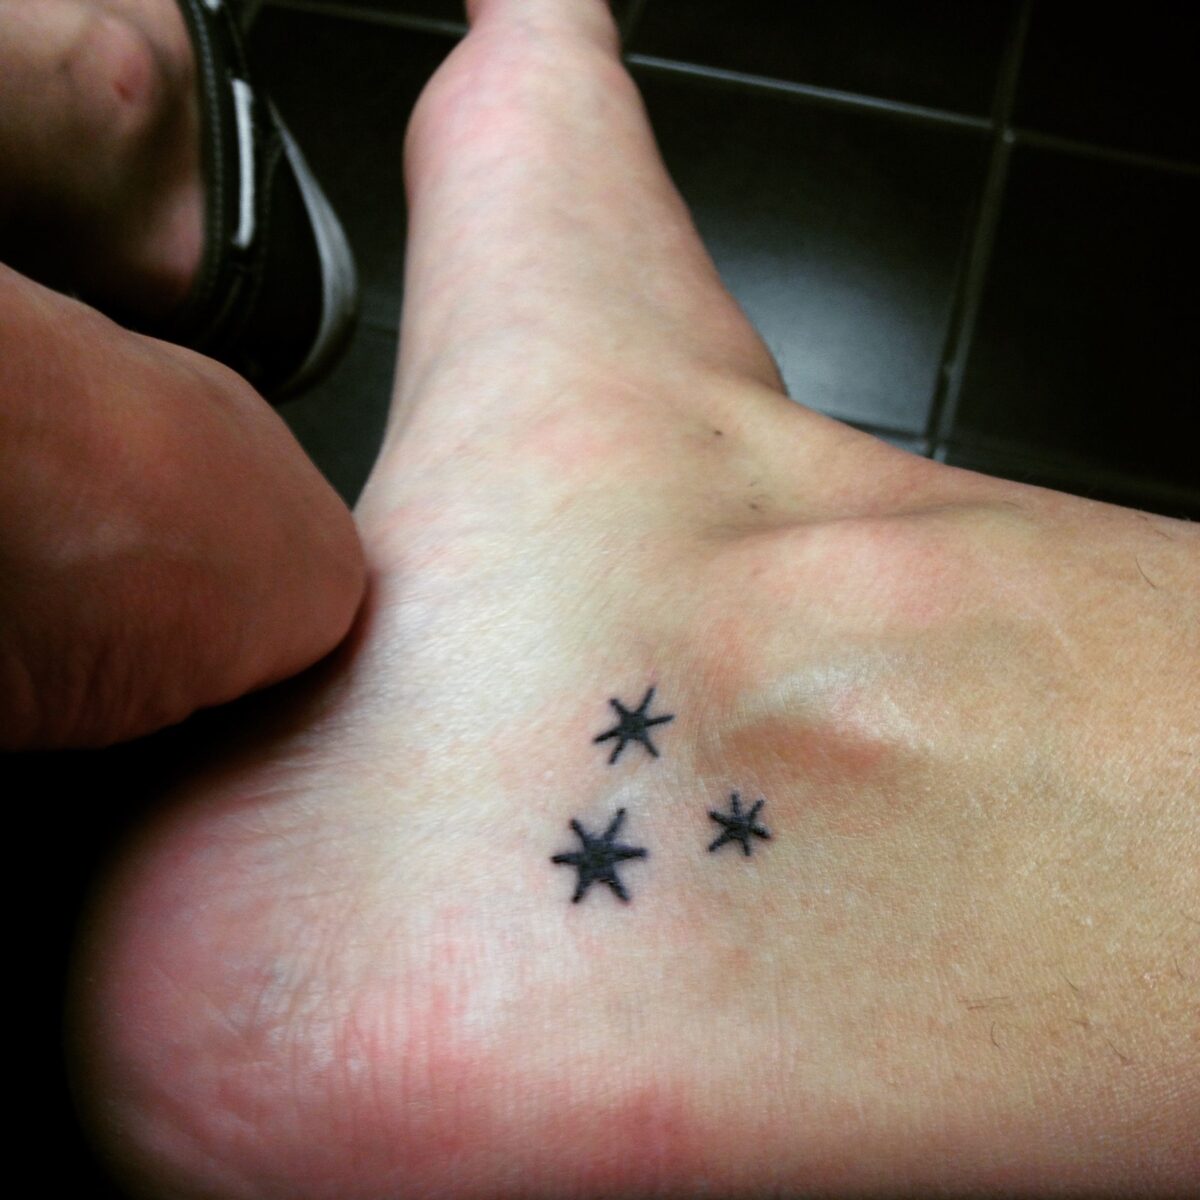 Ankle tattoo7